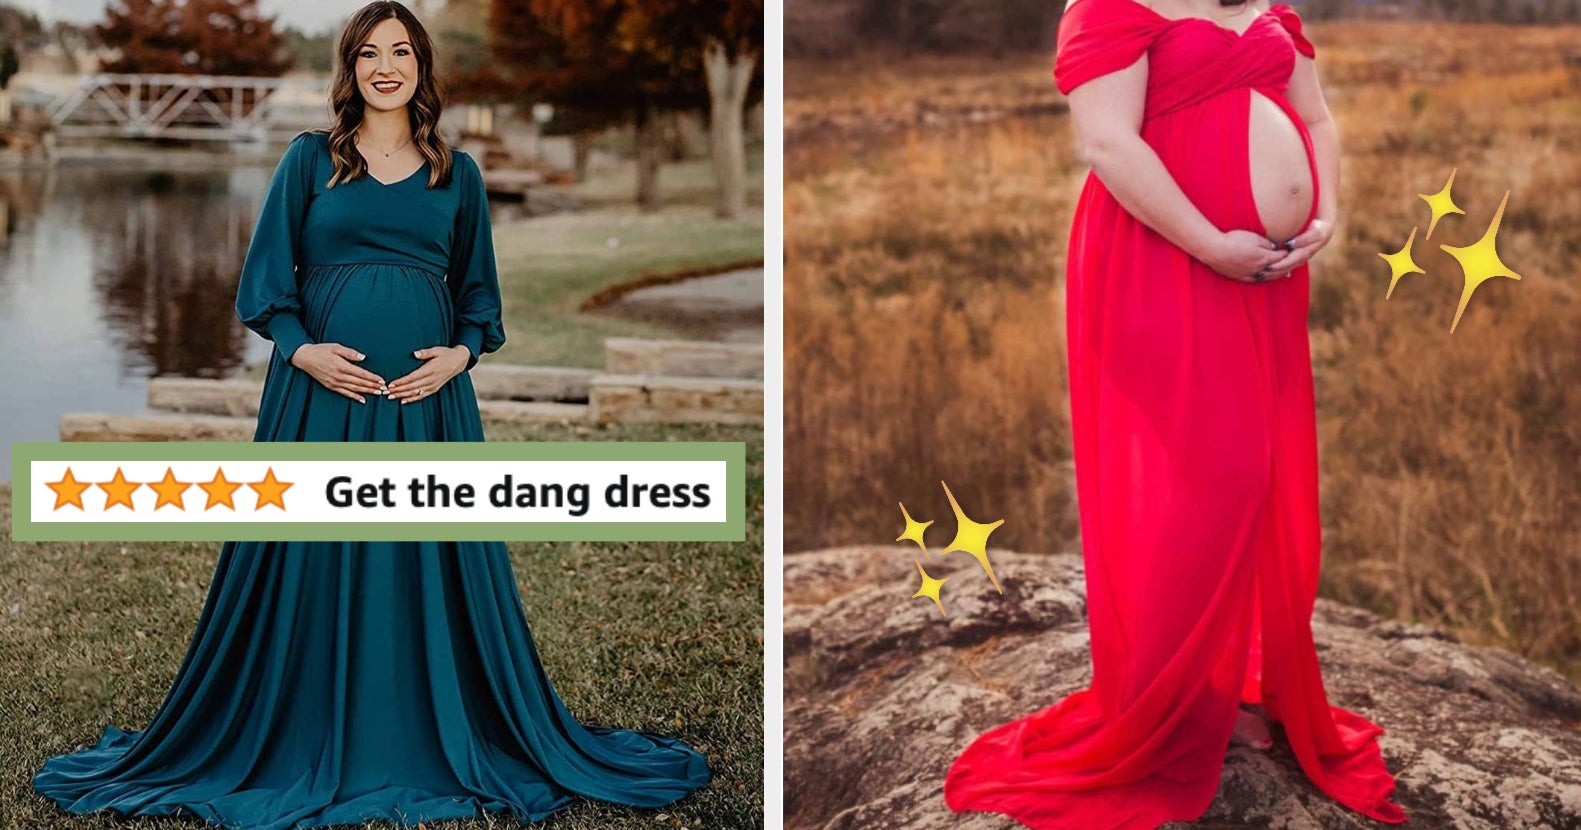 Maternity Dress for Photoshoot Multiway Maternity Wrap Dress Photo Shoot  Maternity Gown Available in 37 Color Muliple Ways to Wear -  Canada